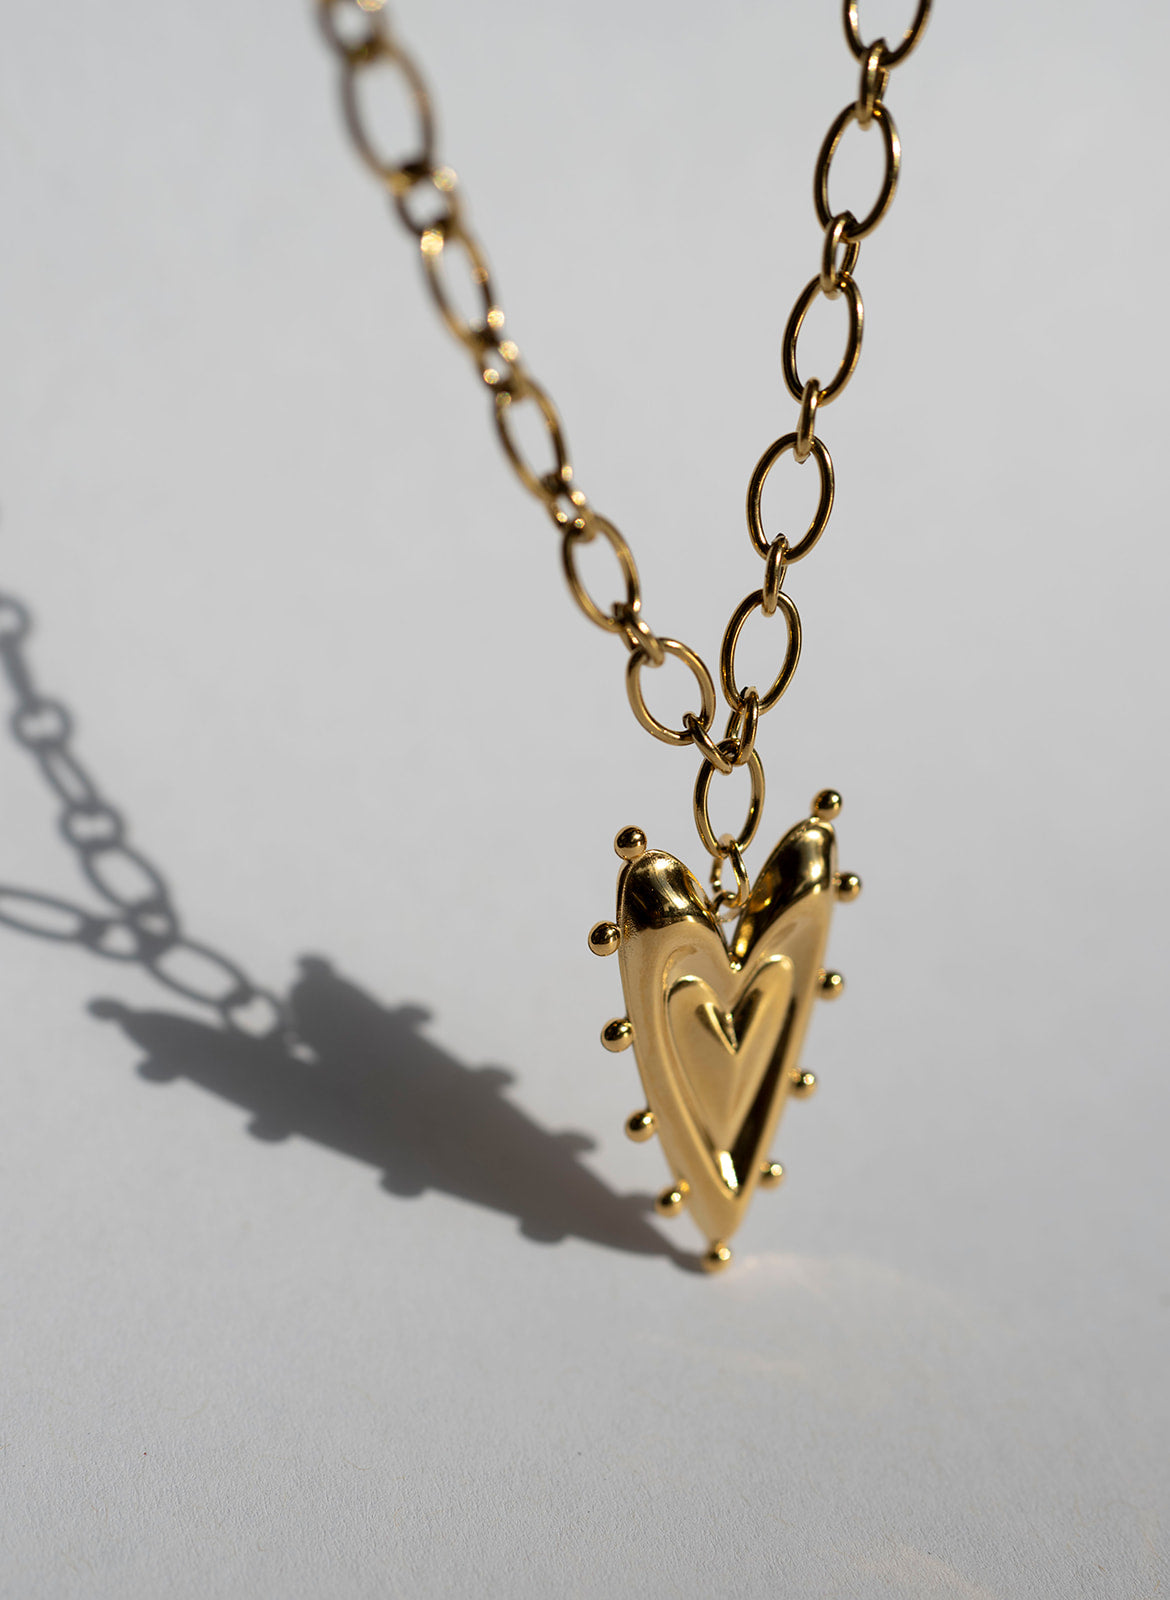 Steal My Heart Necklace